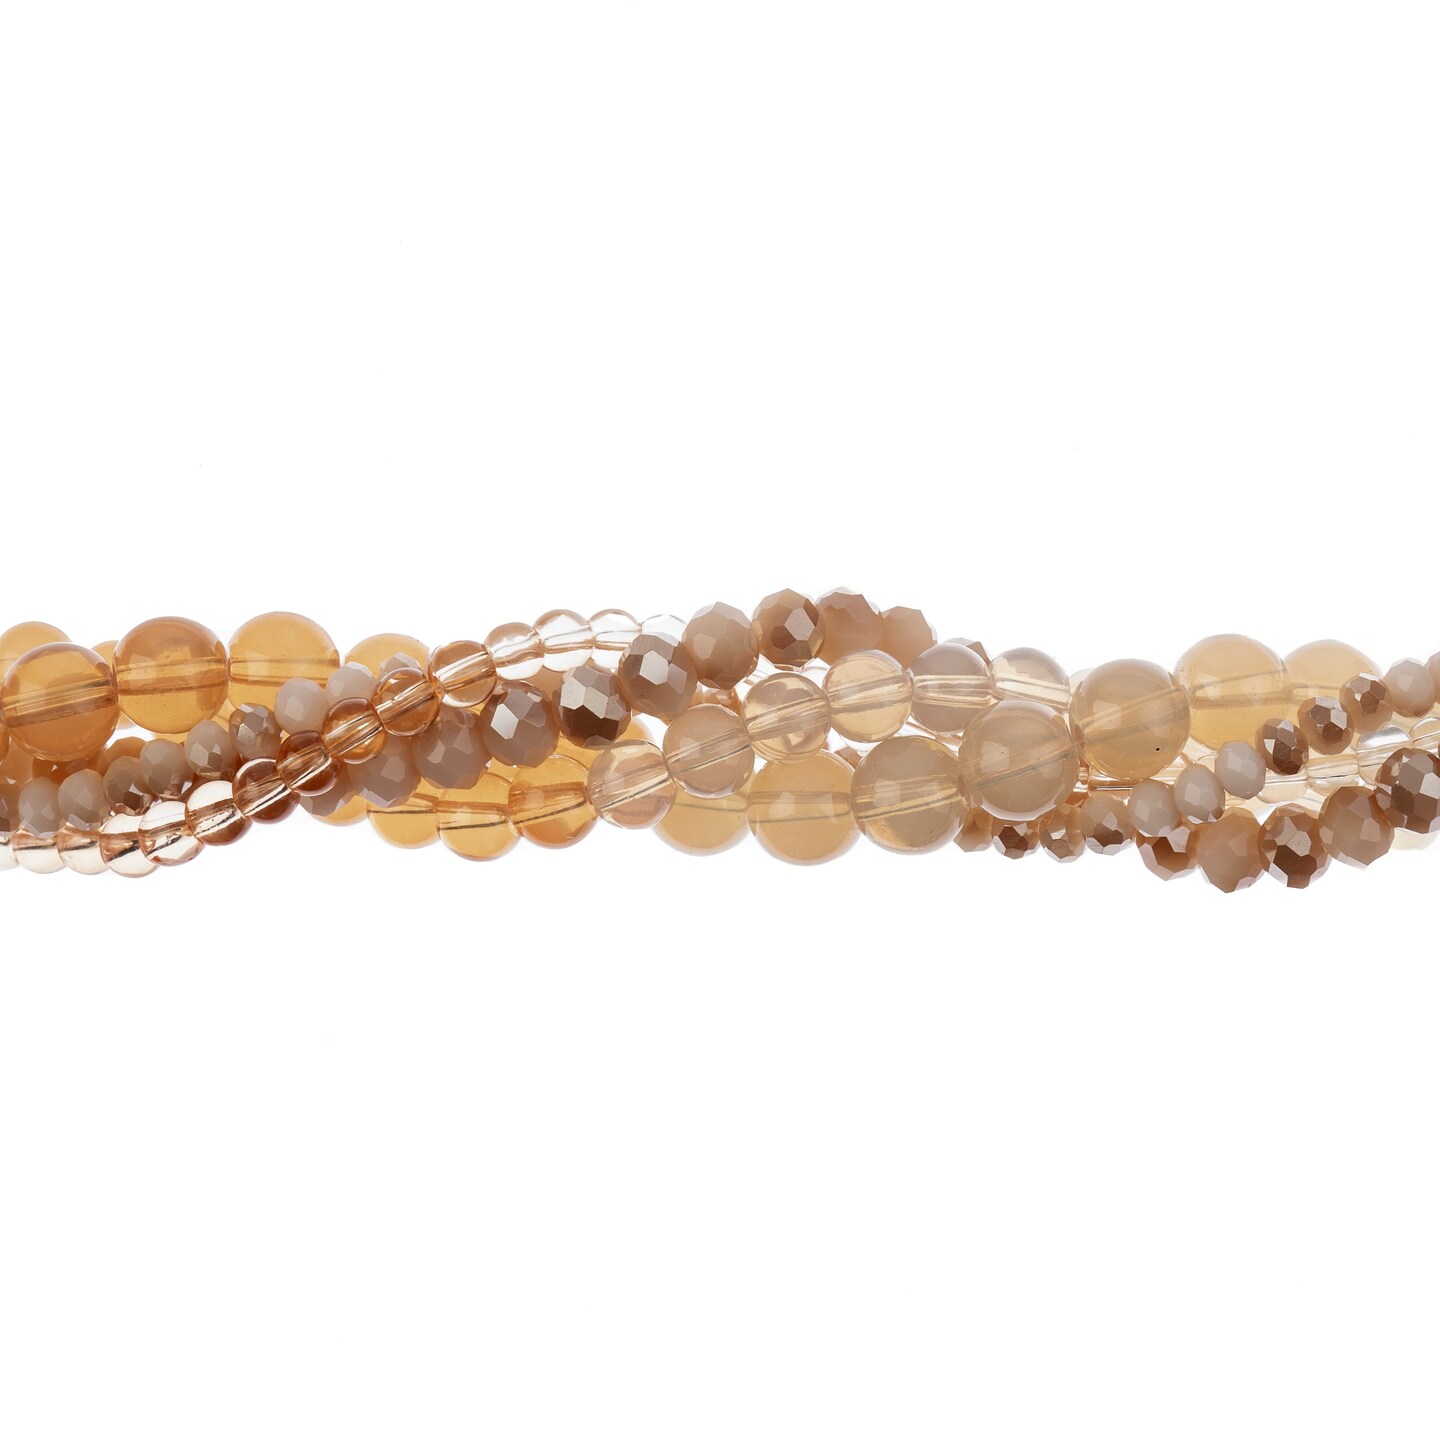 Crystal Lane DIY Amber Glow Twisted Glass &#x26; Pearls Beads, 5 Strands